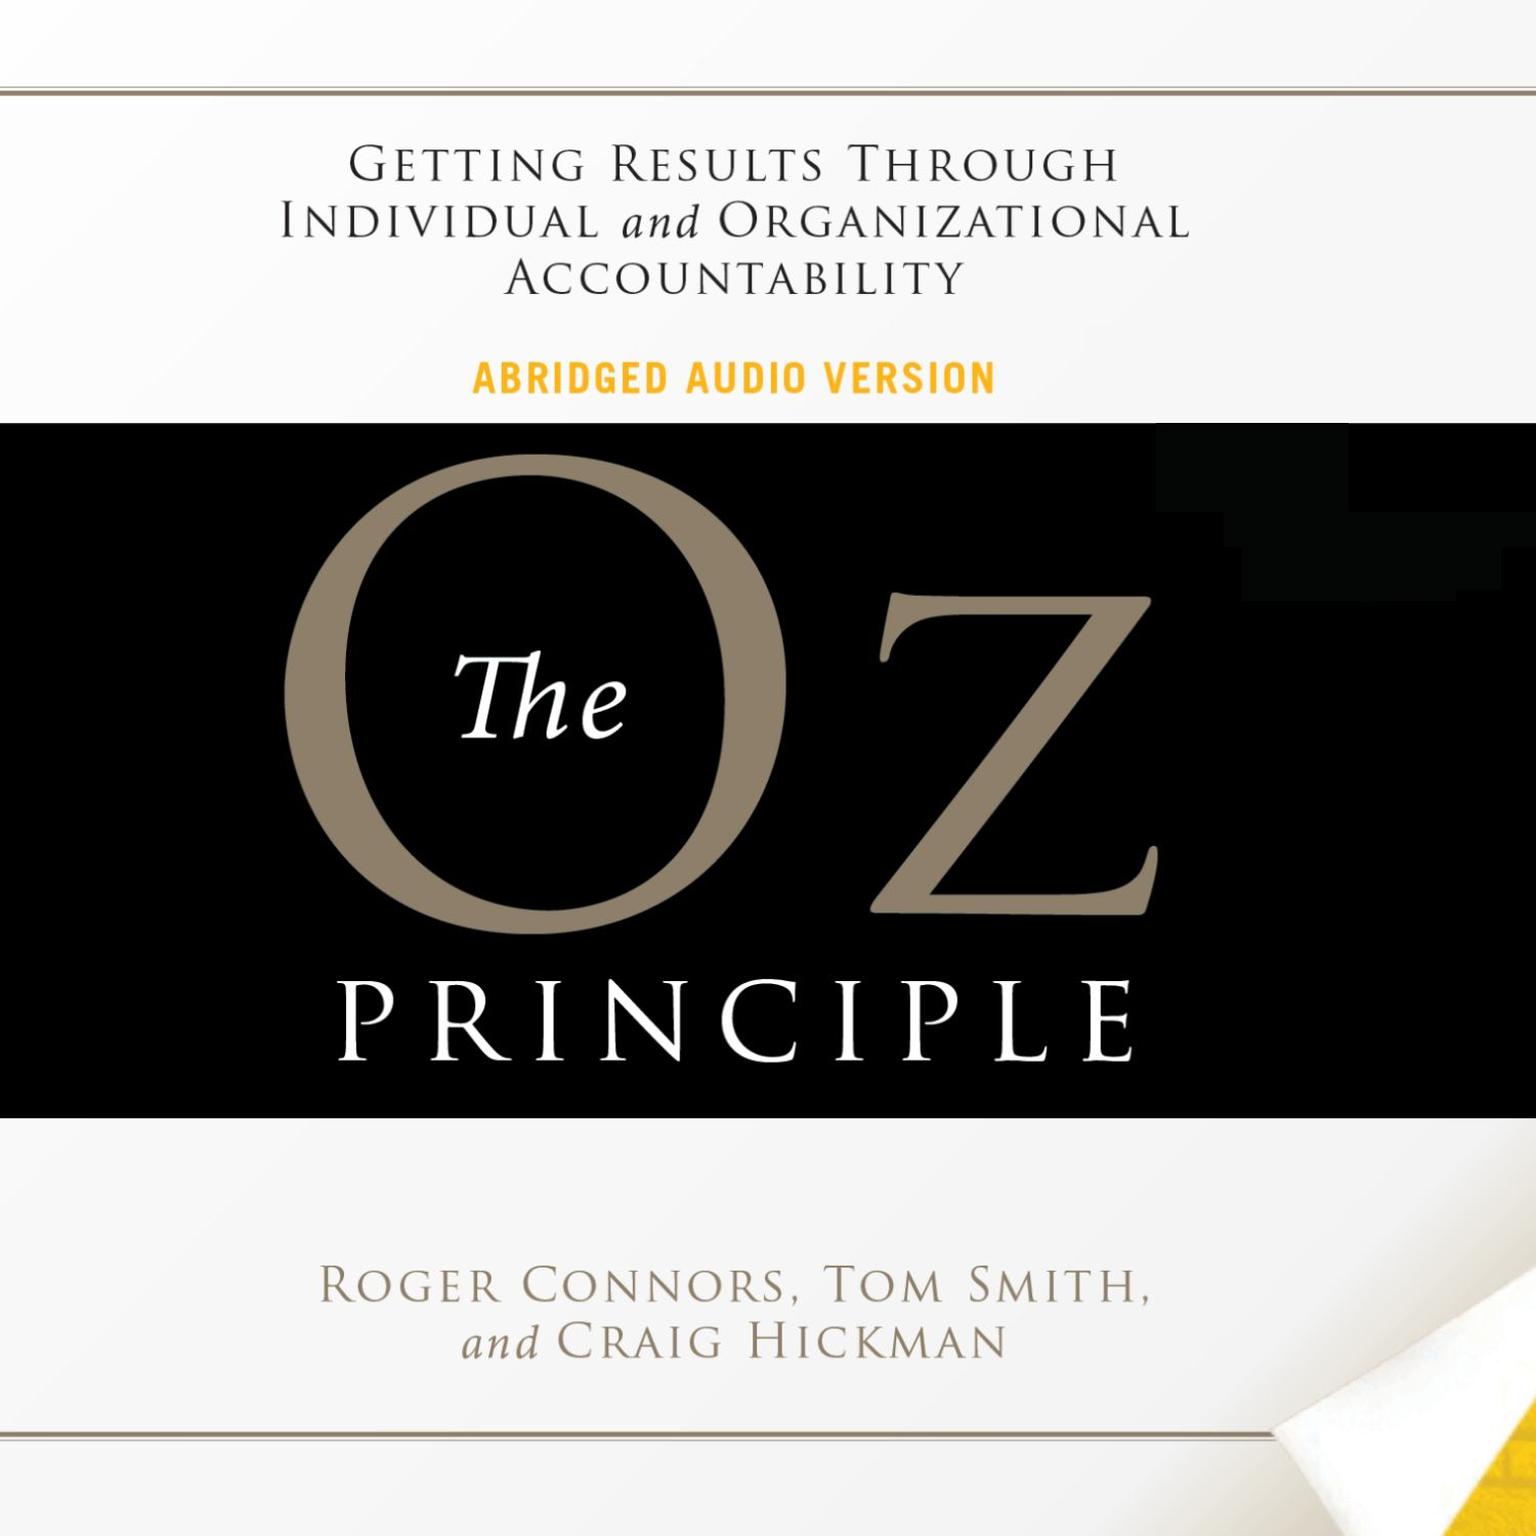 The Oz Principle (Abridged): Getting Results Through Individual and Organizational Accountability Audiobook, by Roger Connors